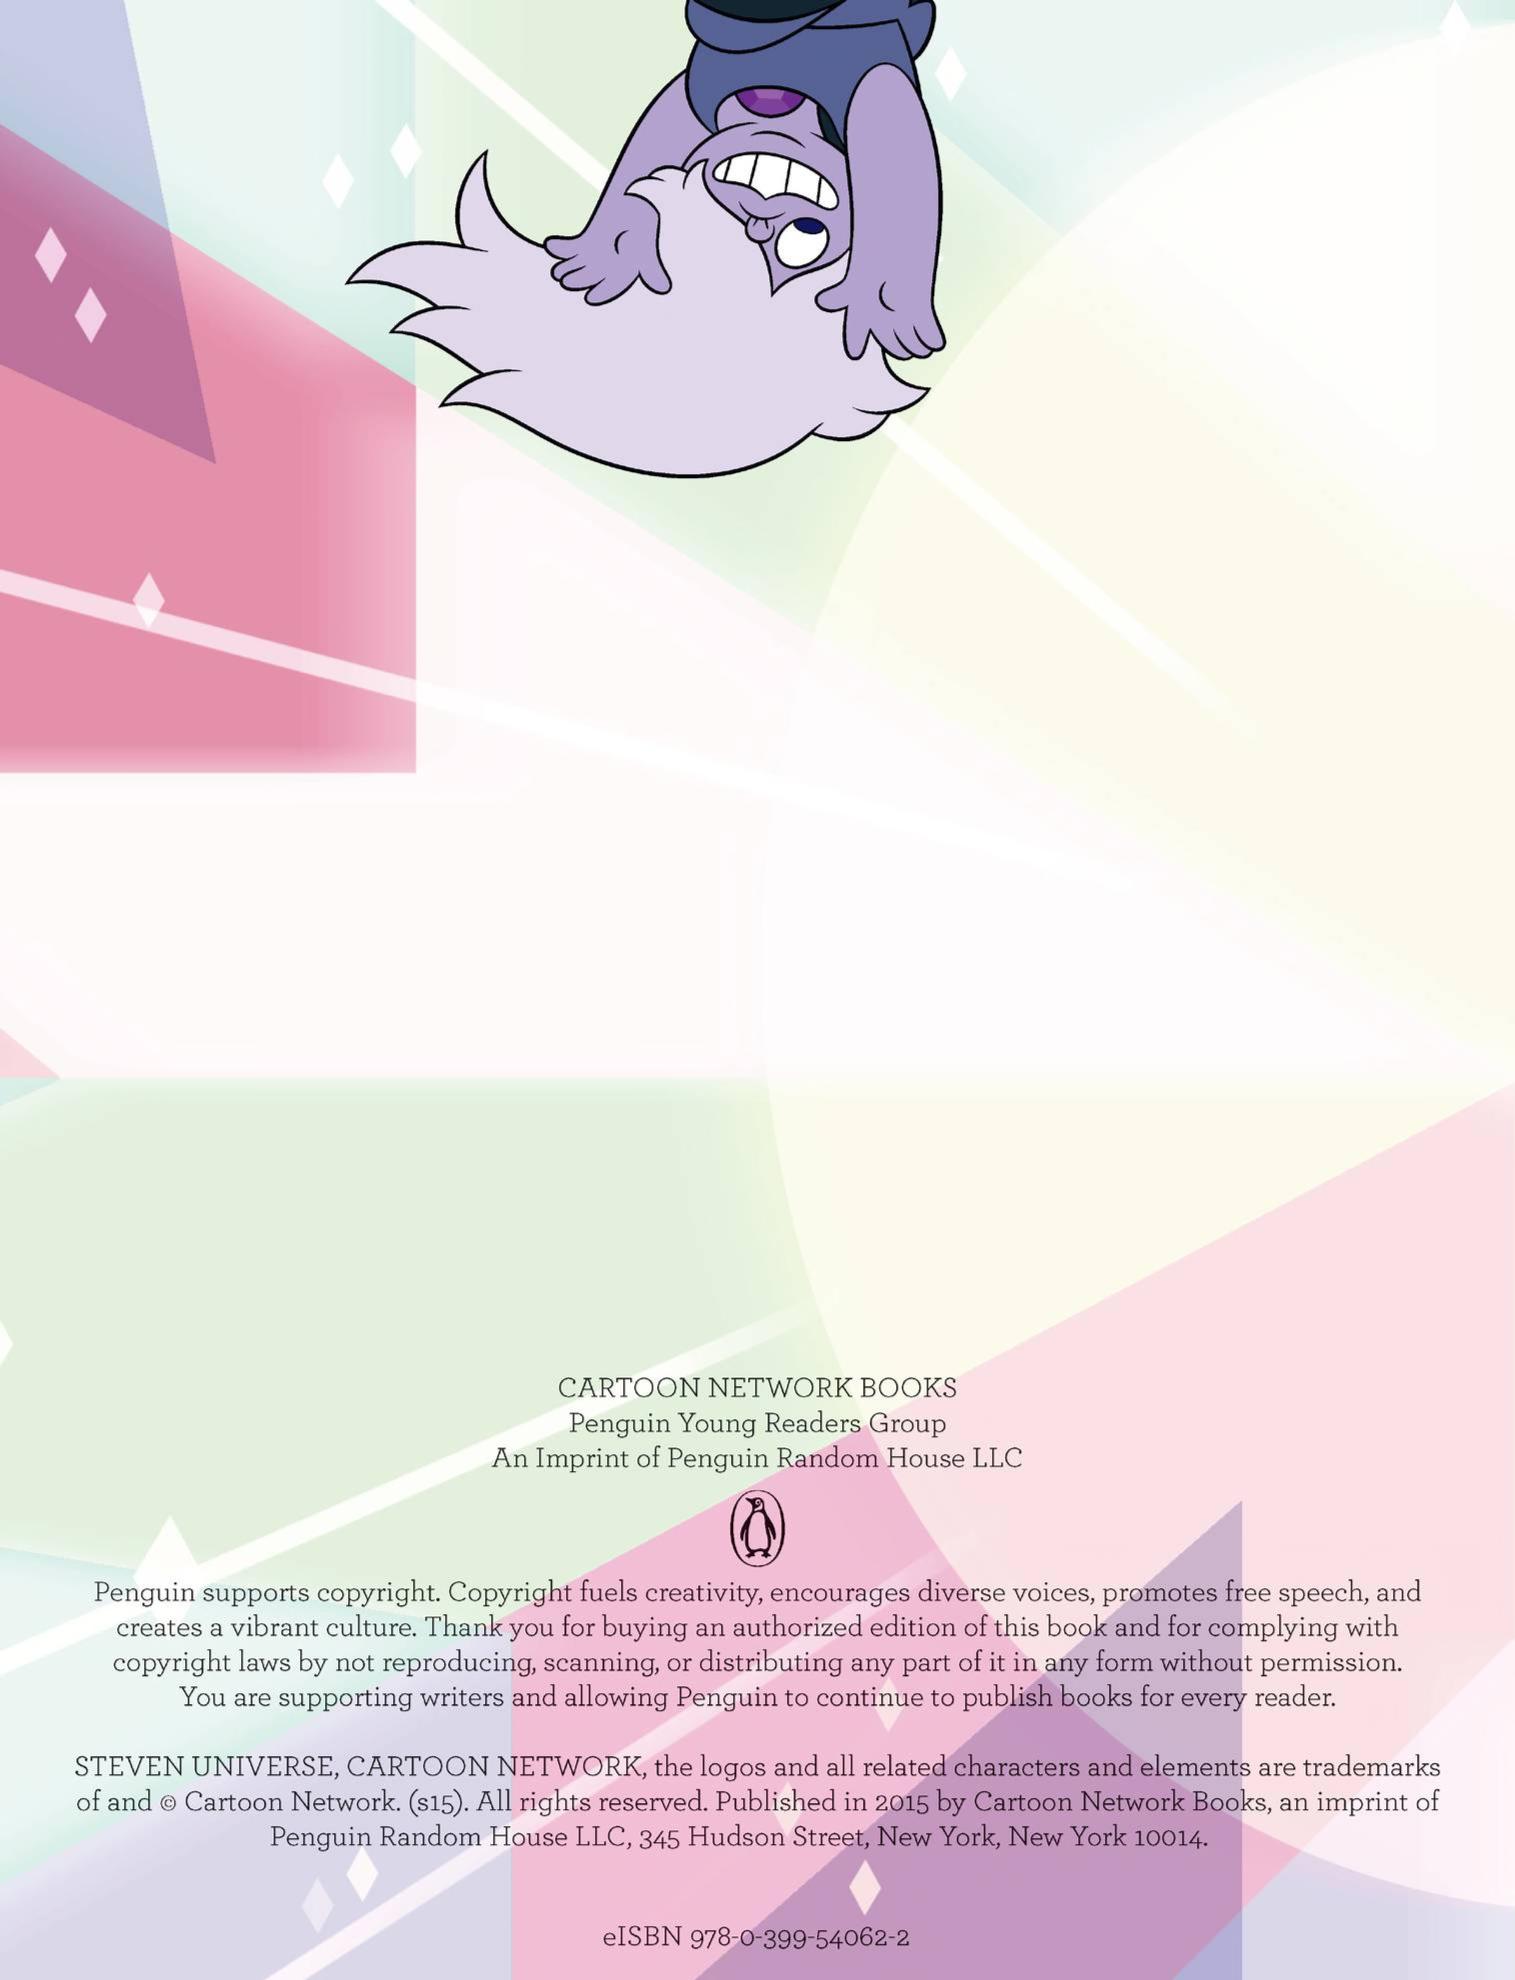 Steven Universe) Rebecca Sugar Guide To The Crystal Gems Cartoon Network  Books : Free Download, Borrow, and Streaming : Internet Archive